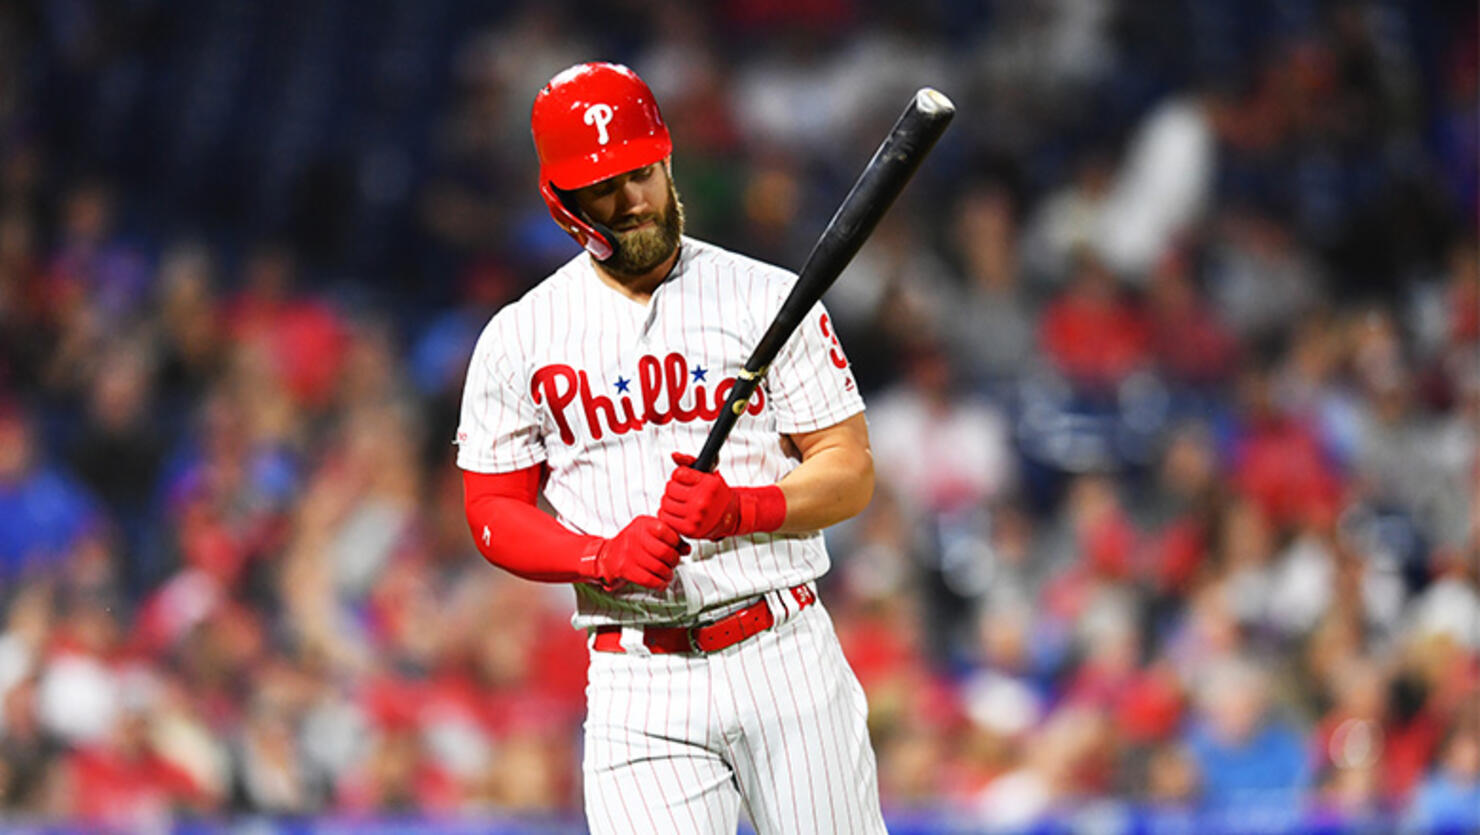 Philadelphia Phillies Outfield Bryce Harper (3) looks at his broken bat after lining out in the third inning during the game between the Detroit Tigers and Philadelphia Phillies